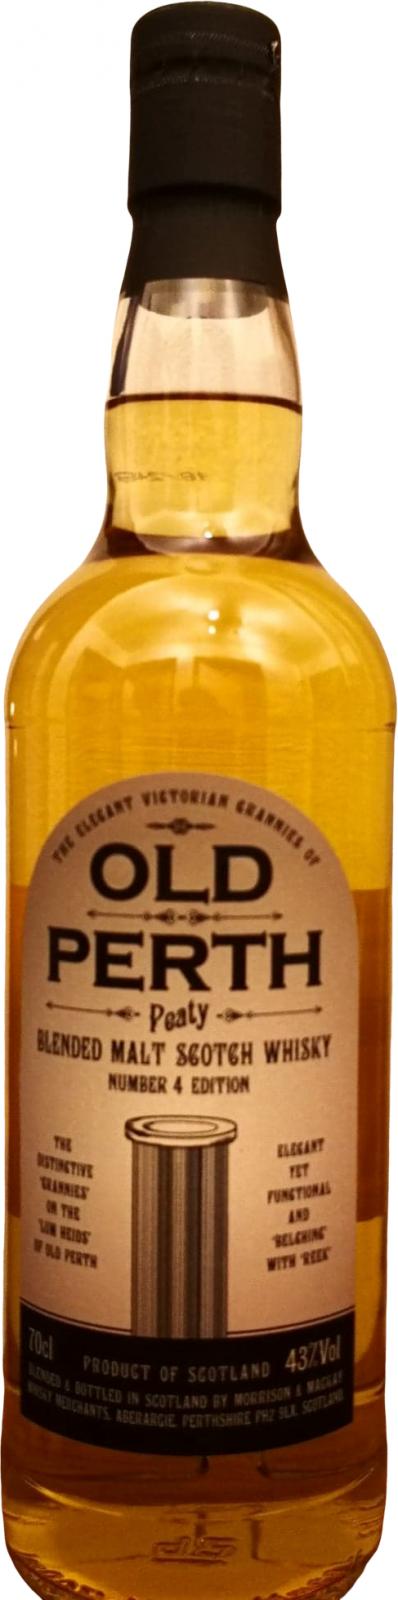 Old Perth Peaty MMcK Number 4 Edition 43% 700ml